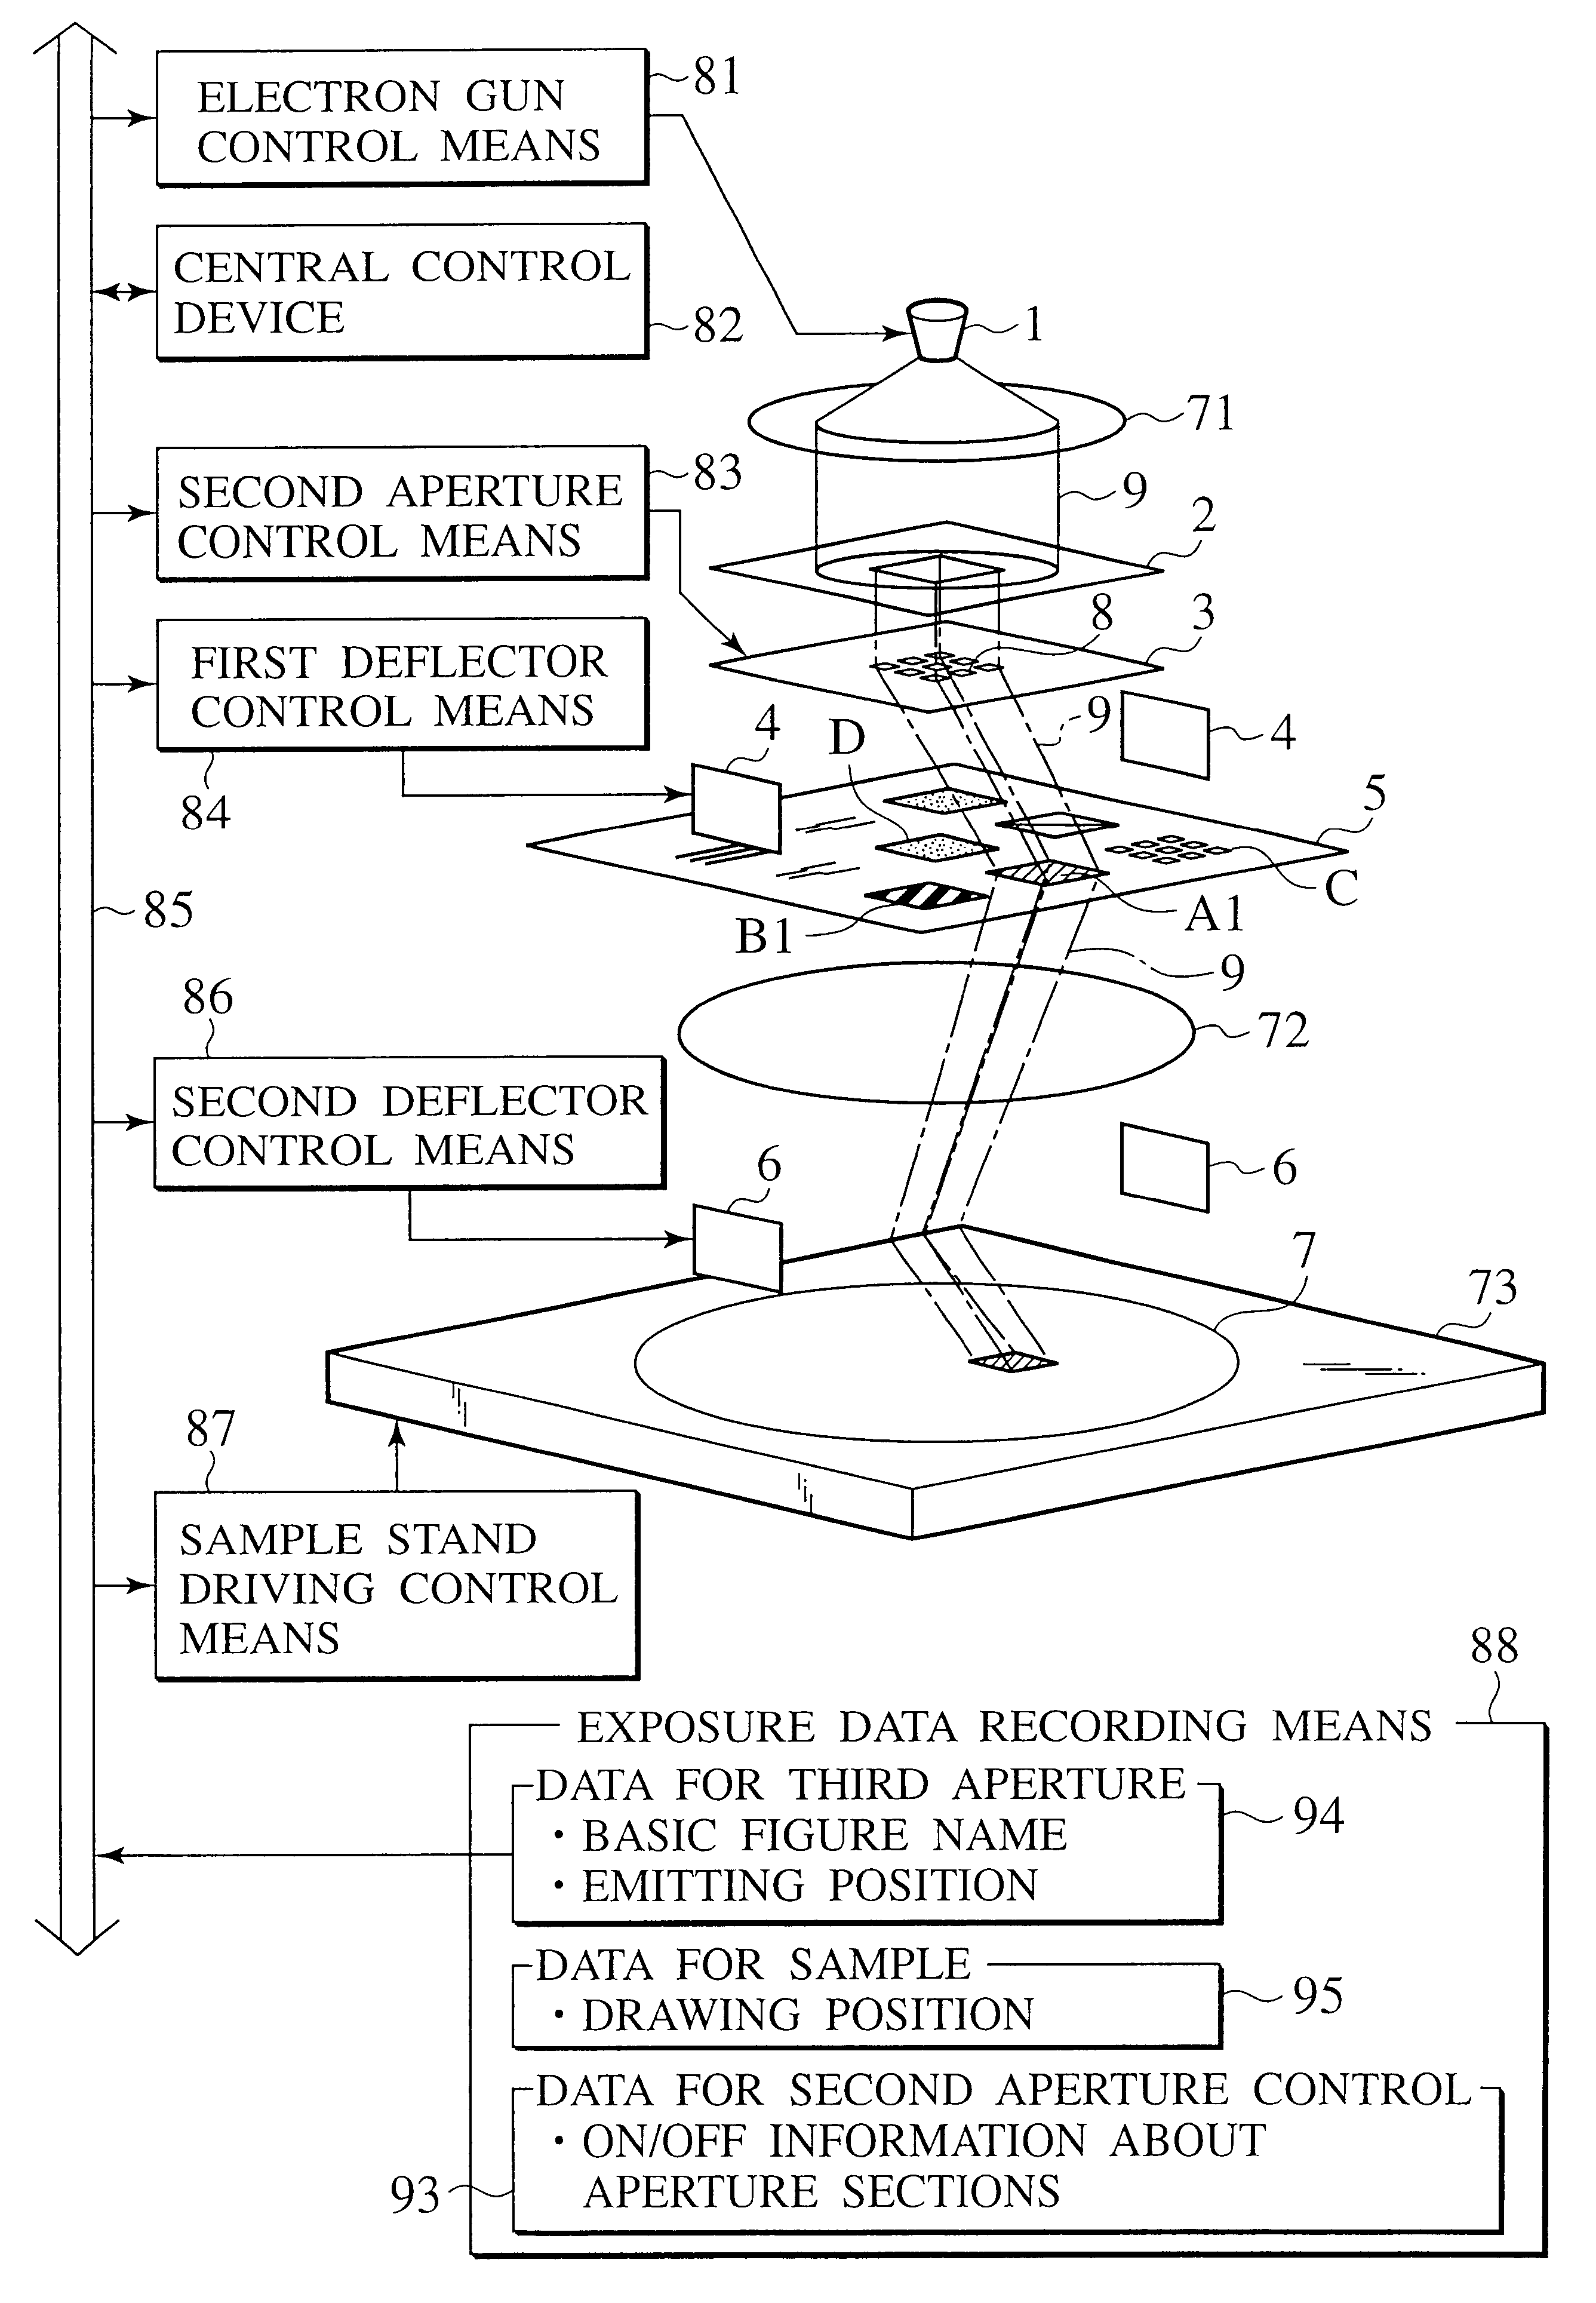 Charged beam exposure apparatus having blanking aperture and basic figure aperture